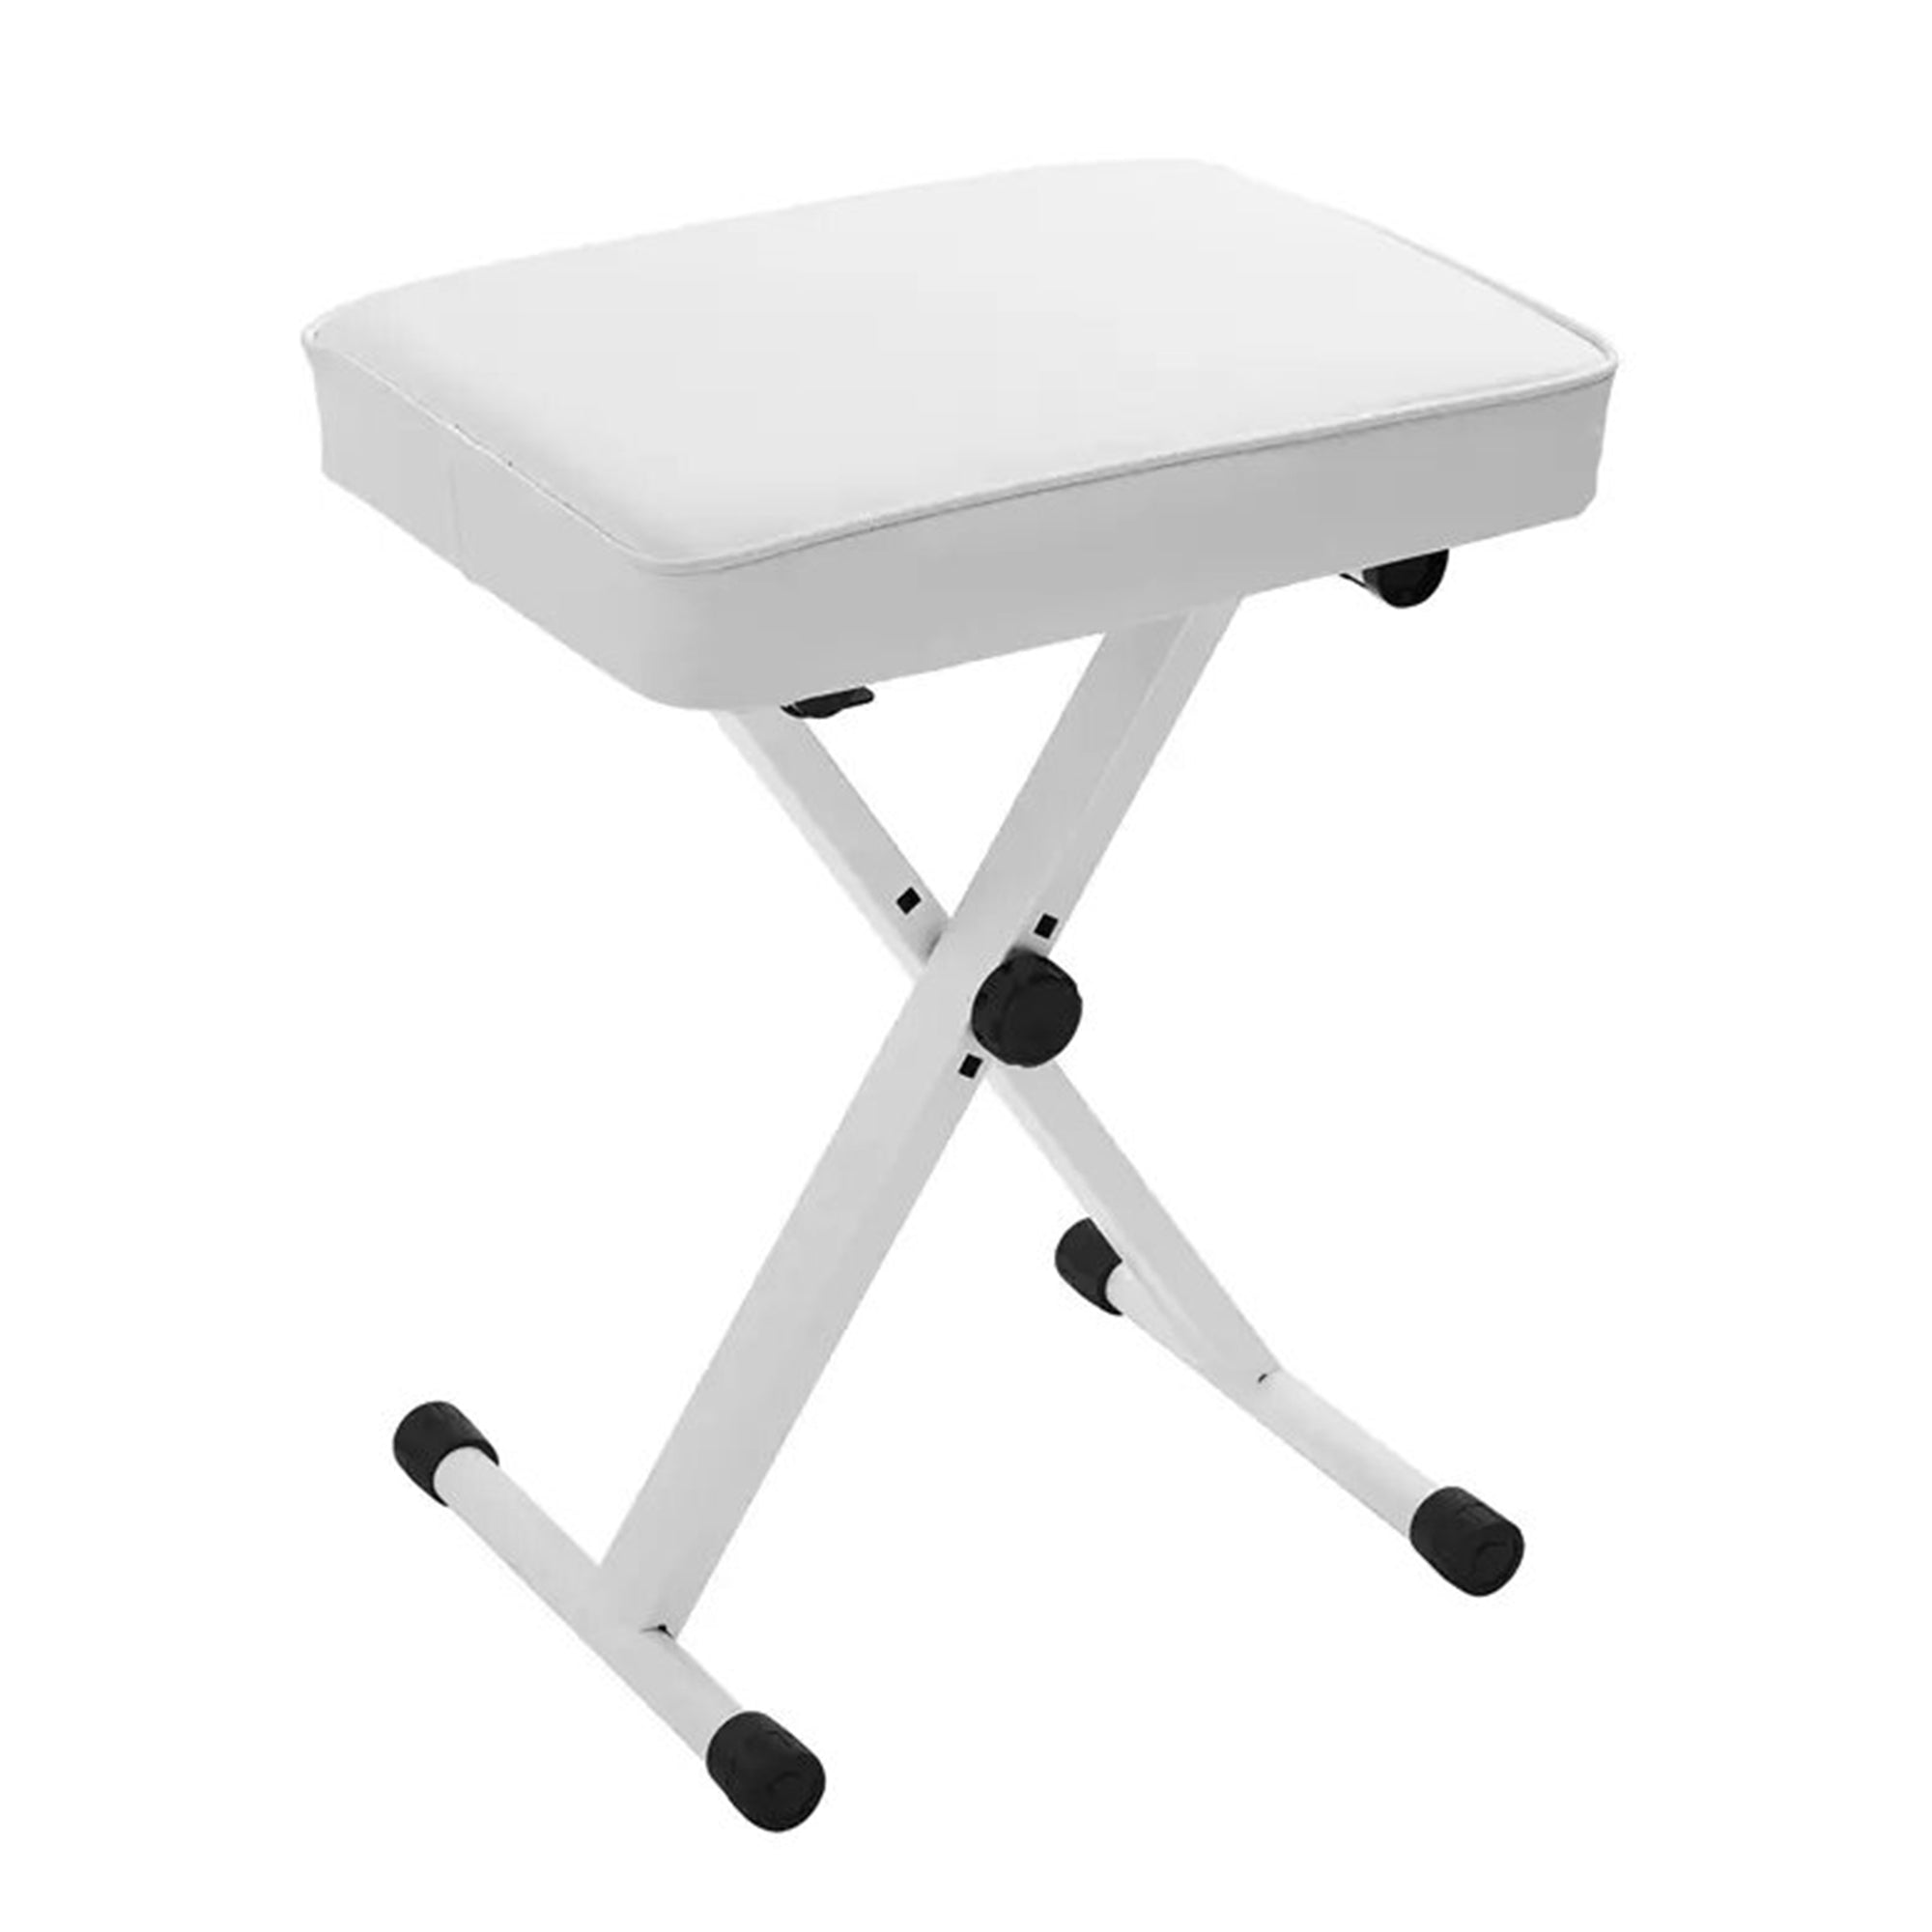 5 Core Adjustable Keyboard Bench 18.5 - 24.2 Inch Heavy Duty X style Bench Piano Stool Chair Thick And Padded Comfortable Guitar Stools -KBB WH HD